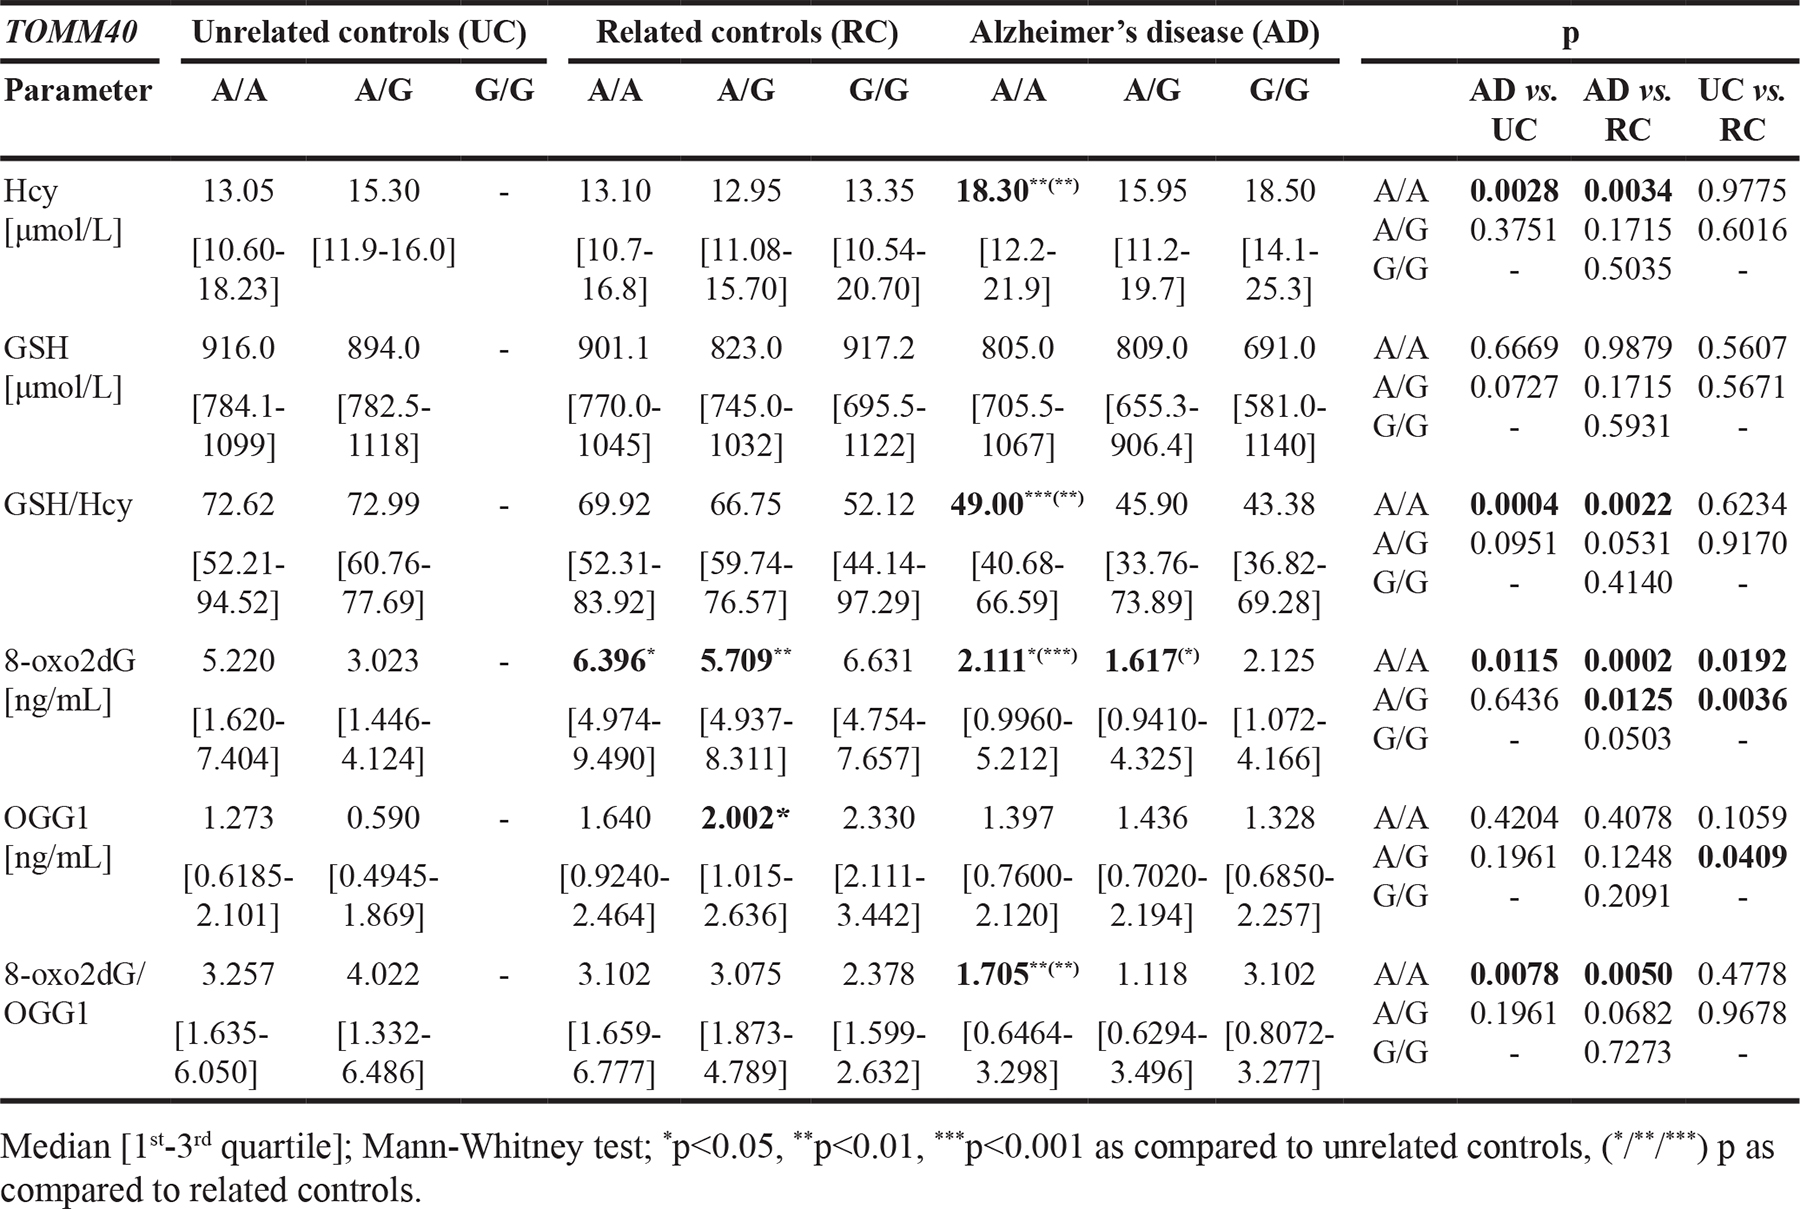 Table 5: The concentration of homocysteine (Hcy), glutathione (GSH), 8-oxo-2&#x2019;-deoxyguanosine (8-oxo2dG) and 8-oxoguanine DNA glycosylase (OGG1) in plasma of Alzheimer&#x2019;s disease (AD) patients and related (RC) and unrelated controls (UC), stratified according to TOMM40&#x2019;650 genotype